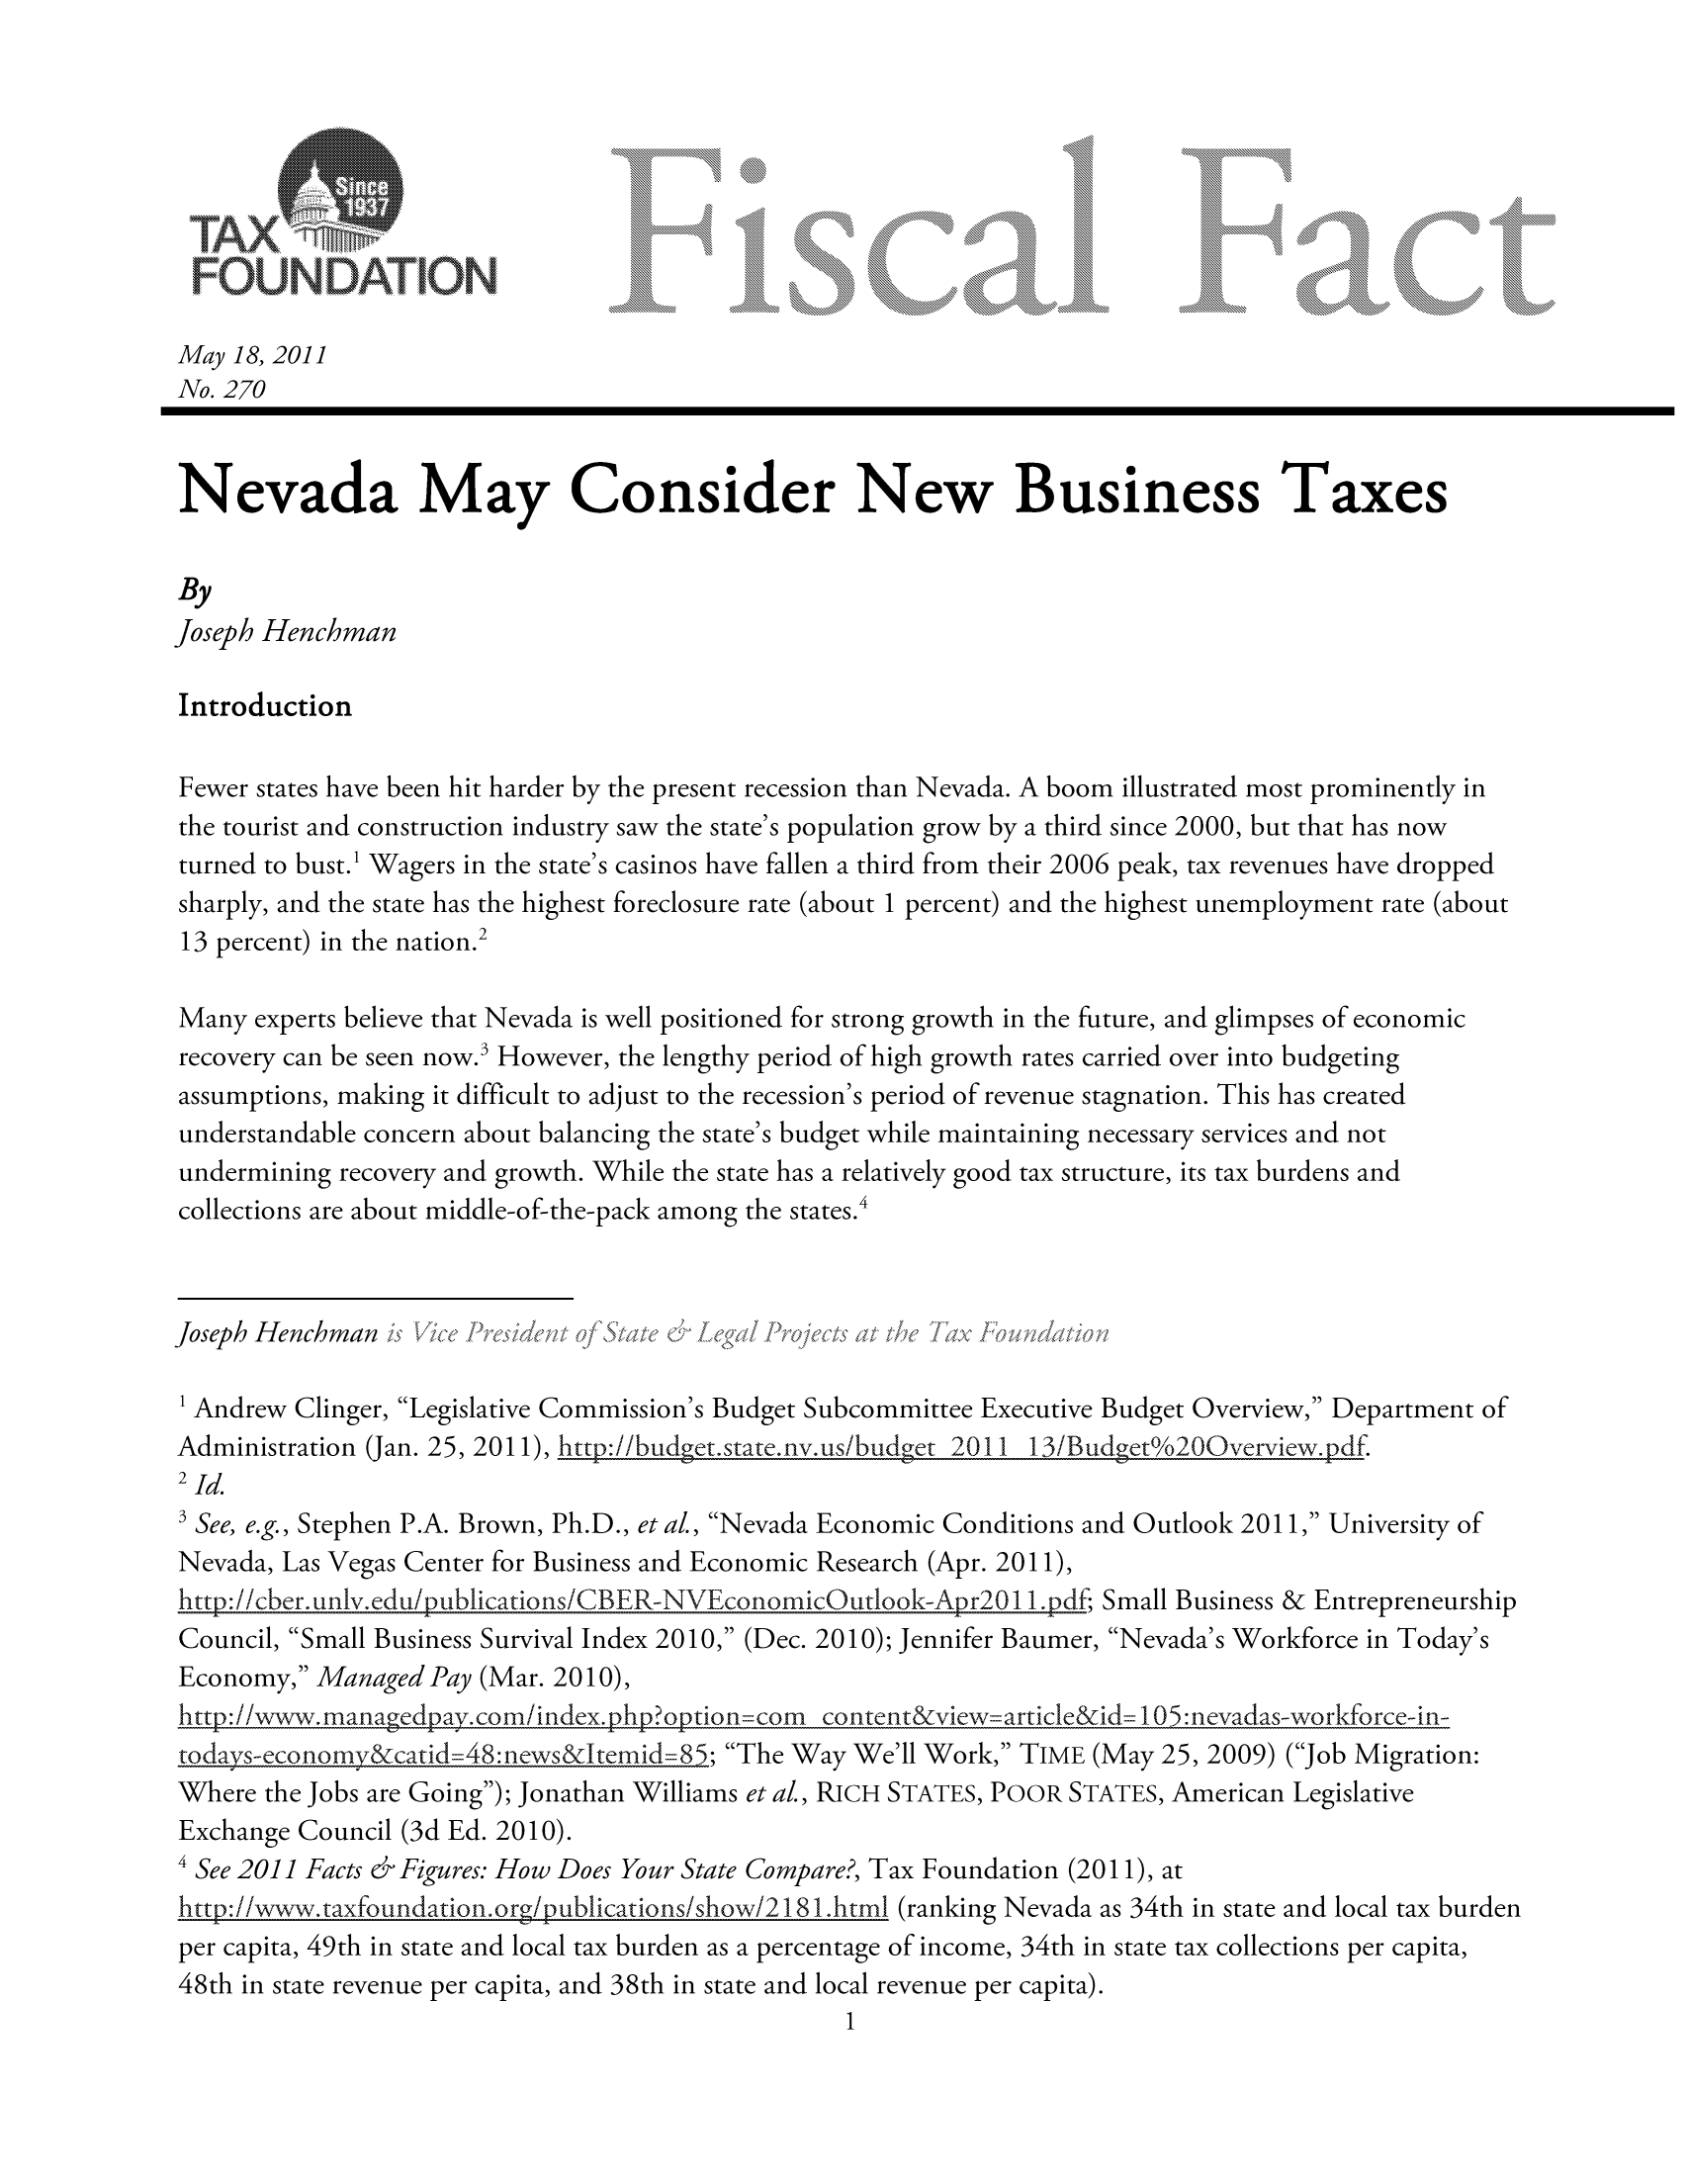 handle is hein.taxfoundation/ffchaxz0001 and id is 1 raw text is: May 18, 2011
No. 270
Nevada May Consider New Business Taxes
By
Joseph Henchman
Introduction
Fewer states have been hit harder by the present recession than Nevada. A boom illustrated most prominently in
the tourist and construction industry saw the state's population grow by a third since 2000, but that has now
turned to bust.' Wagers in the state's casinos have fallen a third from their 2006 peak, tax revenues have dropped
sharply, and the state has the highest foreclosure rate (about 1 percent) and the highest unemployment rate (about
13 percent) in the nation.2
Many experts believe that Nevada is well positioned for strong growth in the future, and glimpses of economic
recovery can be seen now.3 However, the lengthy period of high growth rates carried over into budgeting
assumptions, making it difficult to adjust to the recession's period of revenue stagnation. This has created
understandable concern about balancing the state's budget while maintaining necessary services and not
undermining recovery and growth. While the state has a relatively good tax structure, its tax burdens and
collections are about middle-of-the-pack among the states.4
Joseph  Henchman  ?.  ,,,,., Td   i  <,,   '  .,,  !  .....°
1 Andrew Clinger, Legislative Commission's Budget Subcommittee Executive Budget Overview, Department of
Administration (Jan. 25, 2011), htt ://bud________________________gt.state.nv.us/budgct 201i 1 13/Budgeto200verview.pdf.
2Jd,
SSee, e.g., Stephen P.A. Brown, Ph.D., et a!., Nevada Economic Conditions and Outlook 2011, University of
Nevada, Las Vegas Center for Business and Economic Research (Apr. 2011),
http:!/cber. unlv.edu/ ublications/CBER-NV~conornic utlook-A r01,df Small Business & Entrepreneurship
Council, Small Business Survival Index 2010, (Dec. 2010); Jennifer Baumer, Nevada's Workforce in Today's
Economy, Managed Pay (Mar. 2010),
http:// ,managcdpay. com/index.php?option corn content&vicw articke&id= 105: :nvadas-workfor ce-in-
todays-economy catid=48:news&Jtemid=85_; The Way We'll Work, TIME (May 25, 2009) (Job Migration:
Where the Jobs are Going); Jonathan Williams et a!., RICH STATES, POOR STATES, American Legislative
Exchange Council (3d Ed. 2010).
4 See 2011I Facts & Figures: How Does Your State Compare?, Tax Foundation (2011), at
http://wwwv.taxfoundation.org /?ublications/show/2 181 .htrnl (ranking Nevada as 34th in state and local tax burden
per capita, 49th in state and local tax burden as a percentage of income, 34th in state tax collections per capita,

48th in state revenue per capita, and 38th in state and local revenue per capita).


